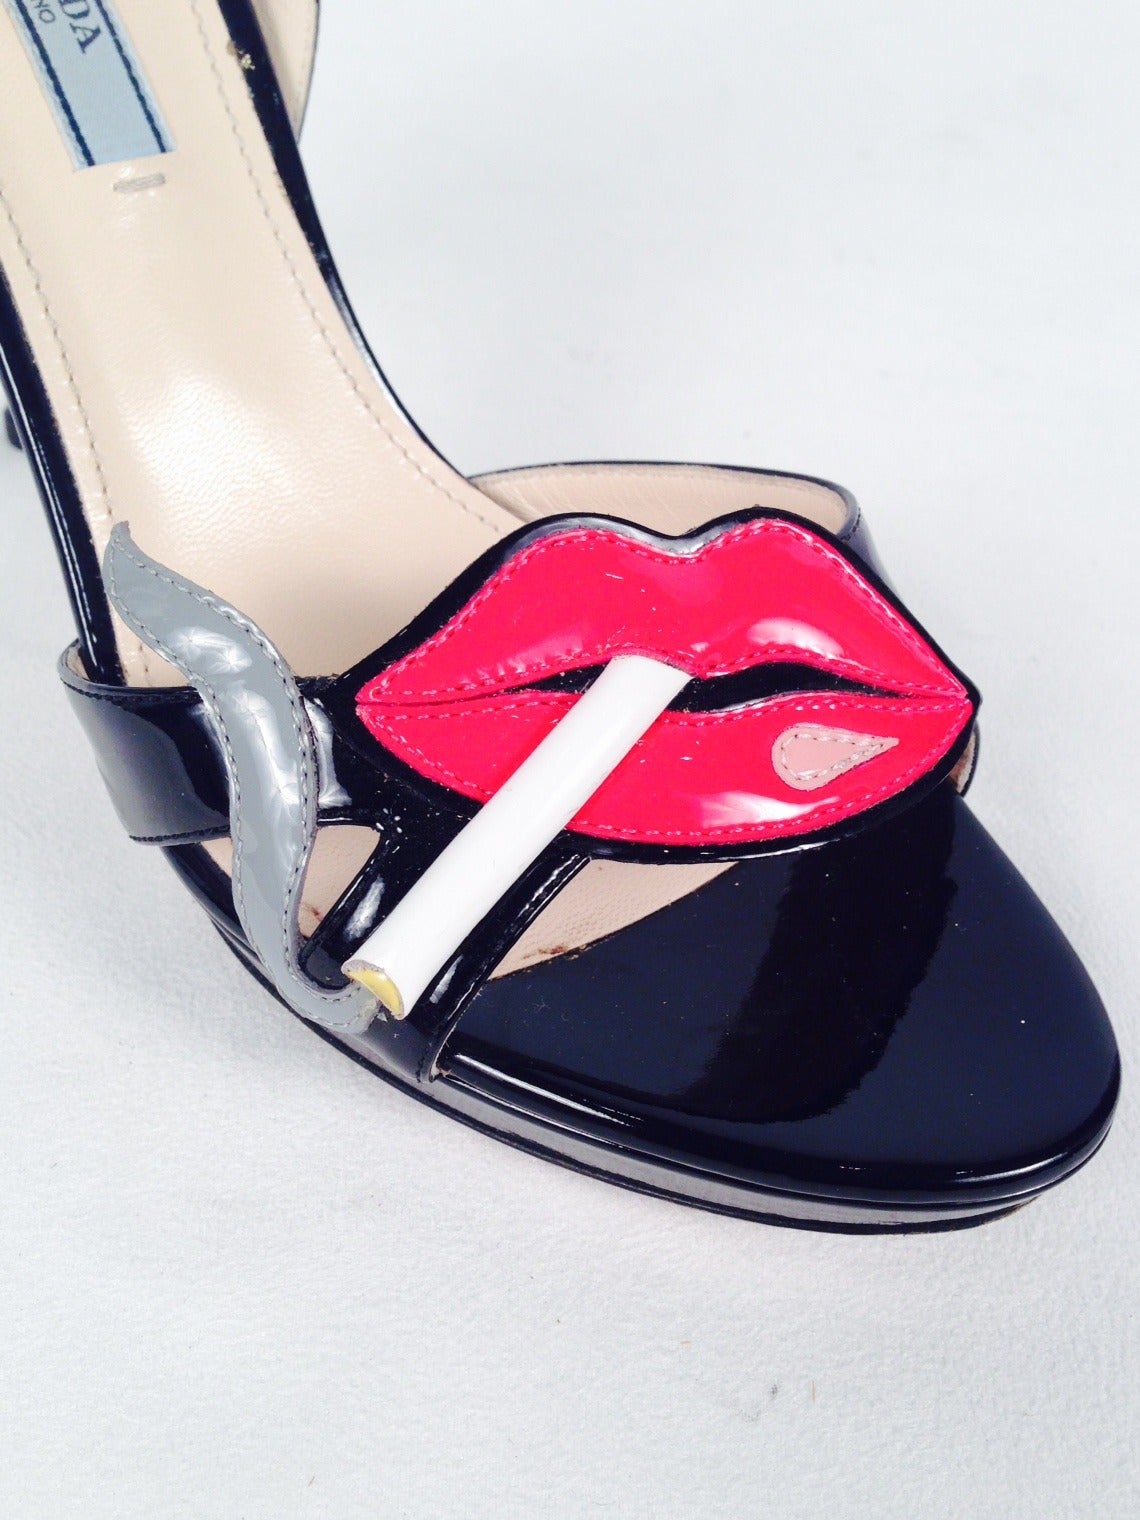 Prada Smoking Lips Ankle Strap High Heel Sandals caused a sensation when introduced by 